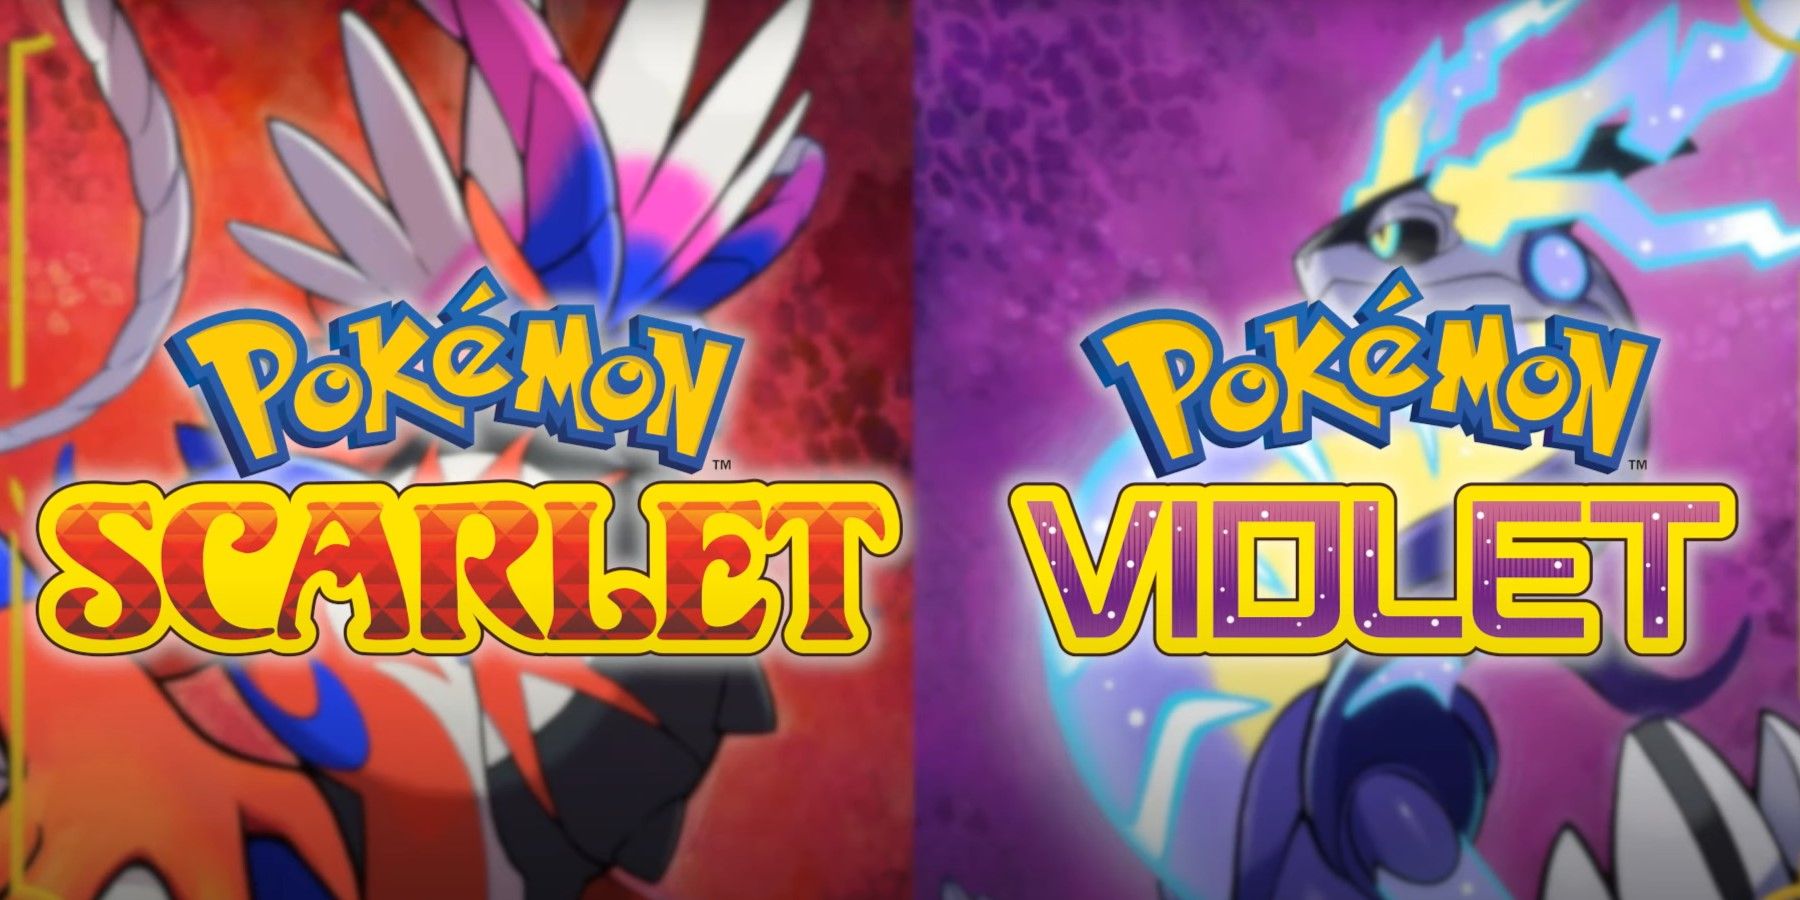 The Pokemon character is showing the title screens of Pokémon Scarlet and Violet.